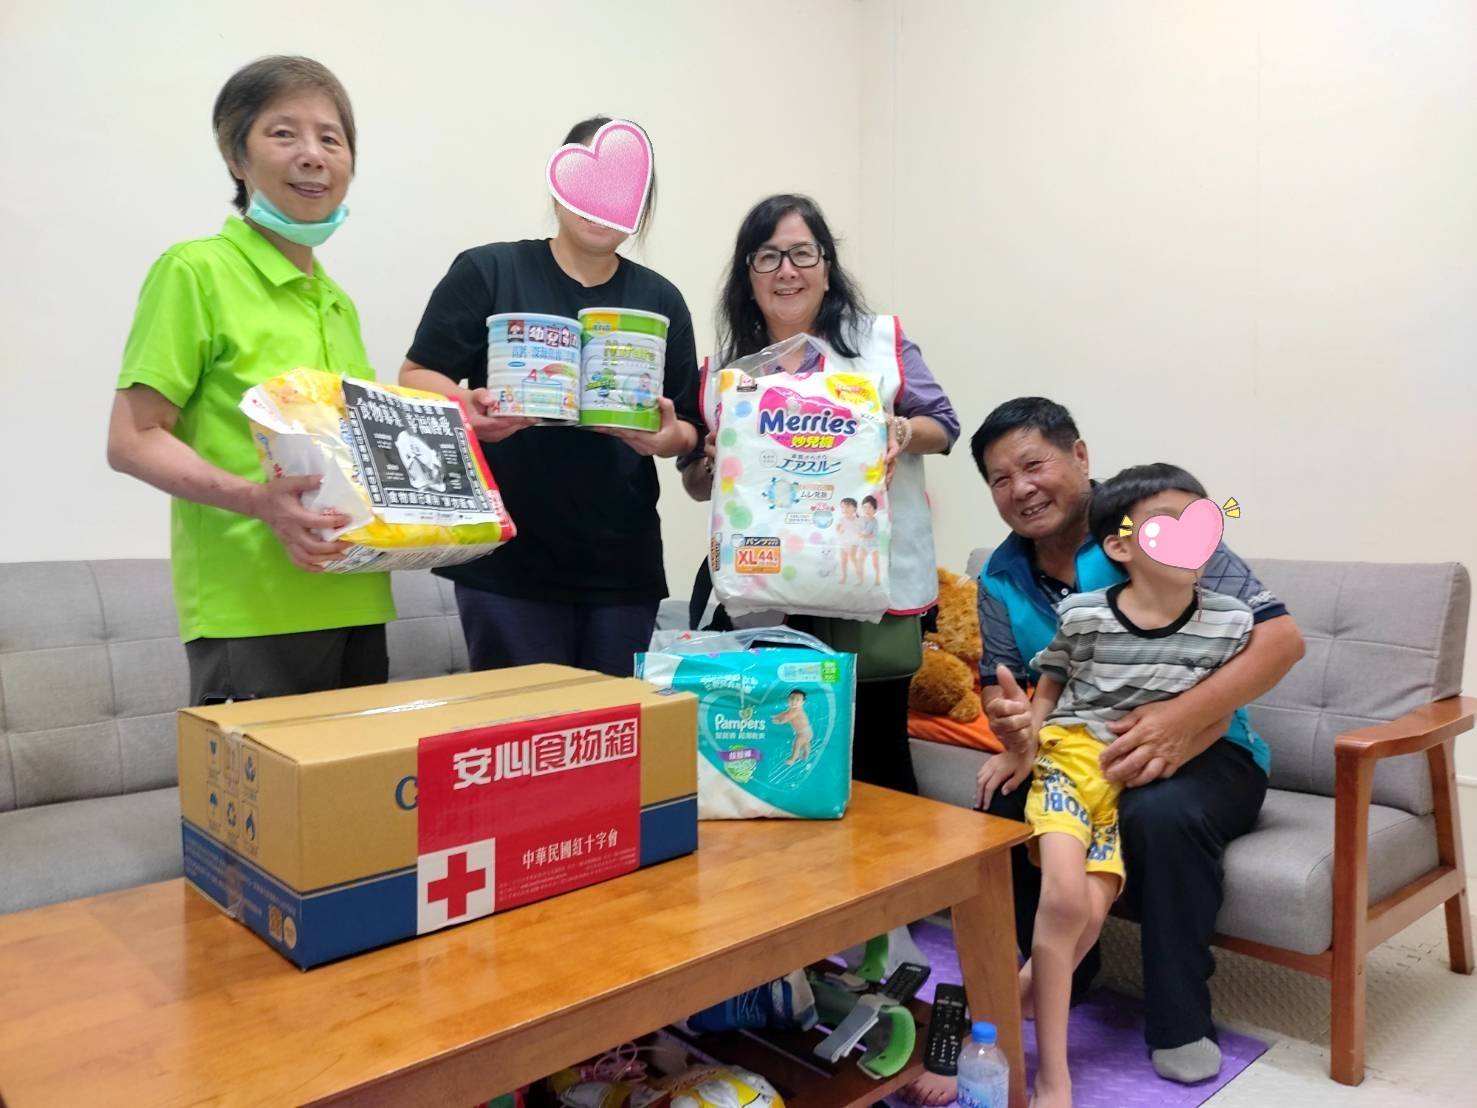 TRC has mobilized 21 Red Cross branches since last week, working together to distribute food boxes to a total of 1,300 families in Taiwan and the outlying islands